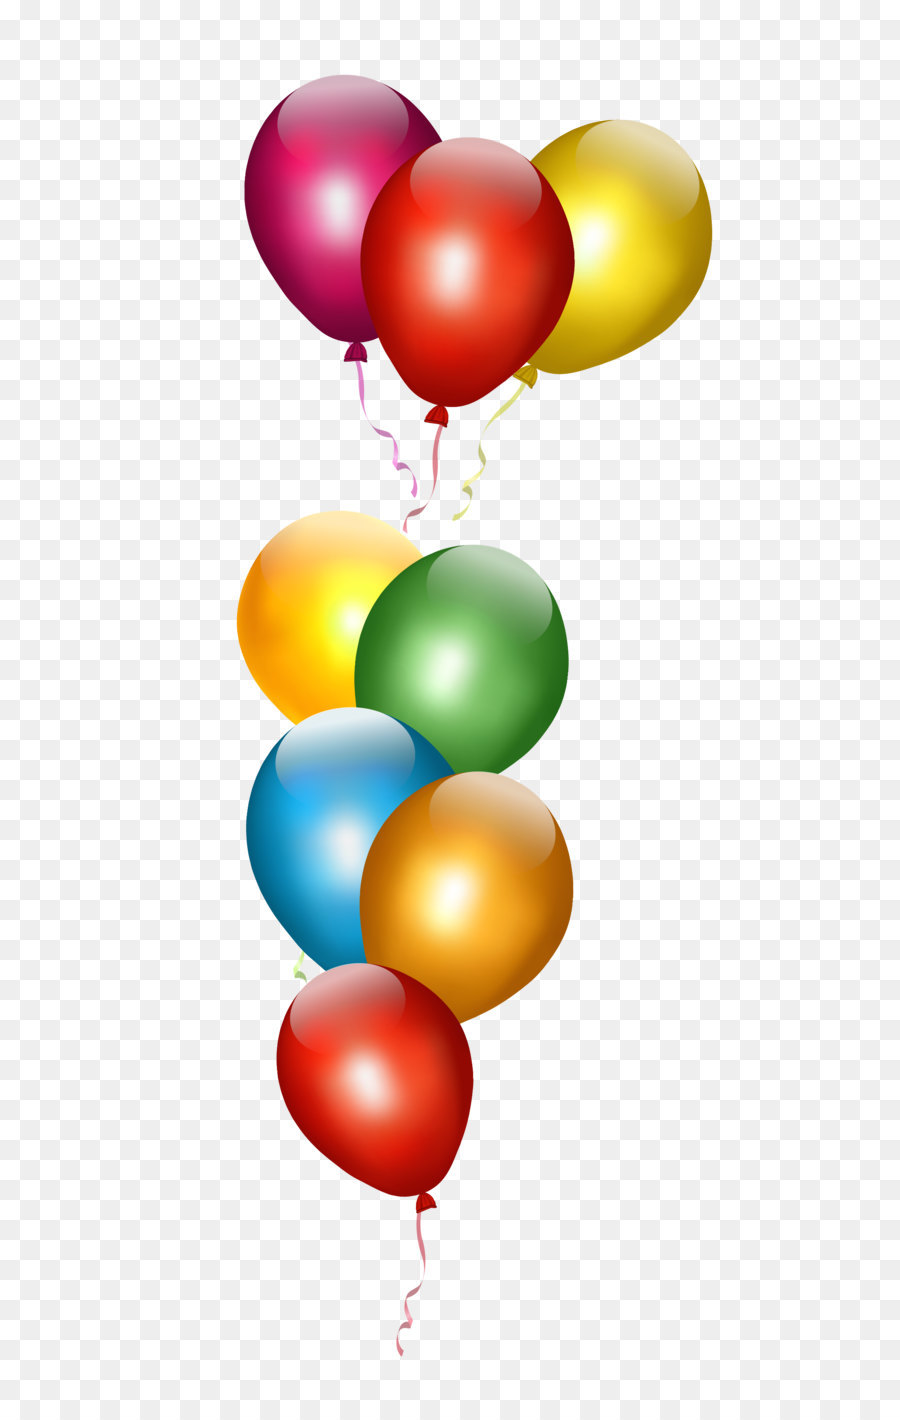 Party Toy balloon Birthday Gift - Transparent Balloons png download - 1604*3471 - Free Transparent Toy Balloon png Download.